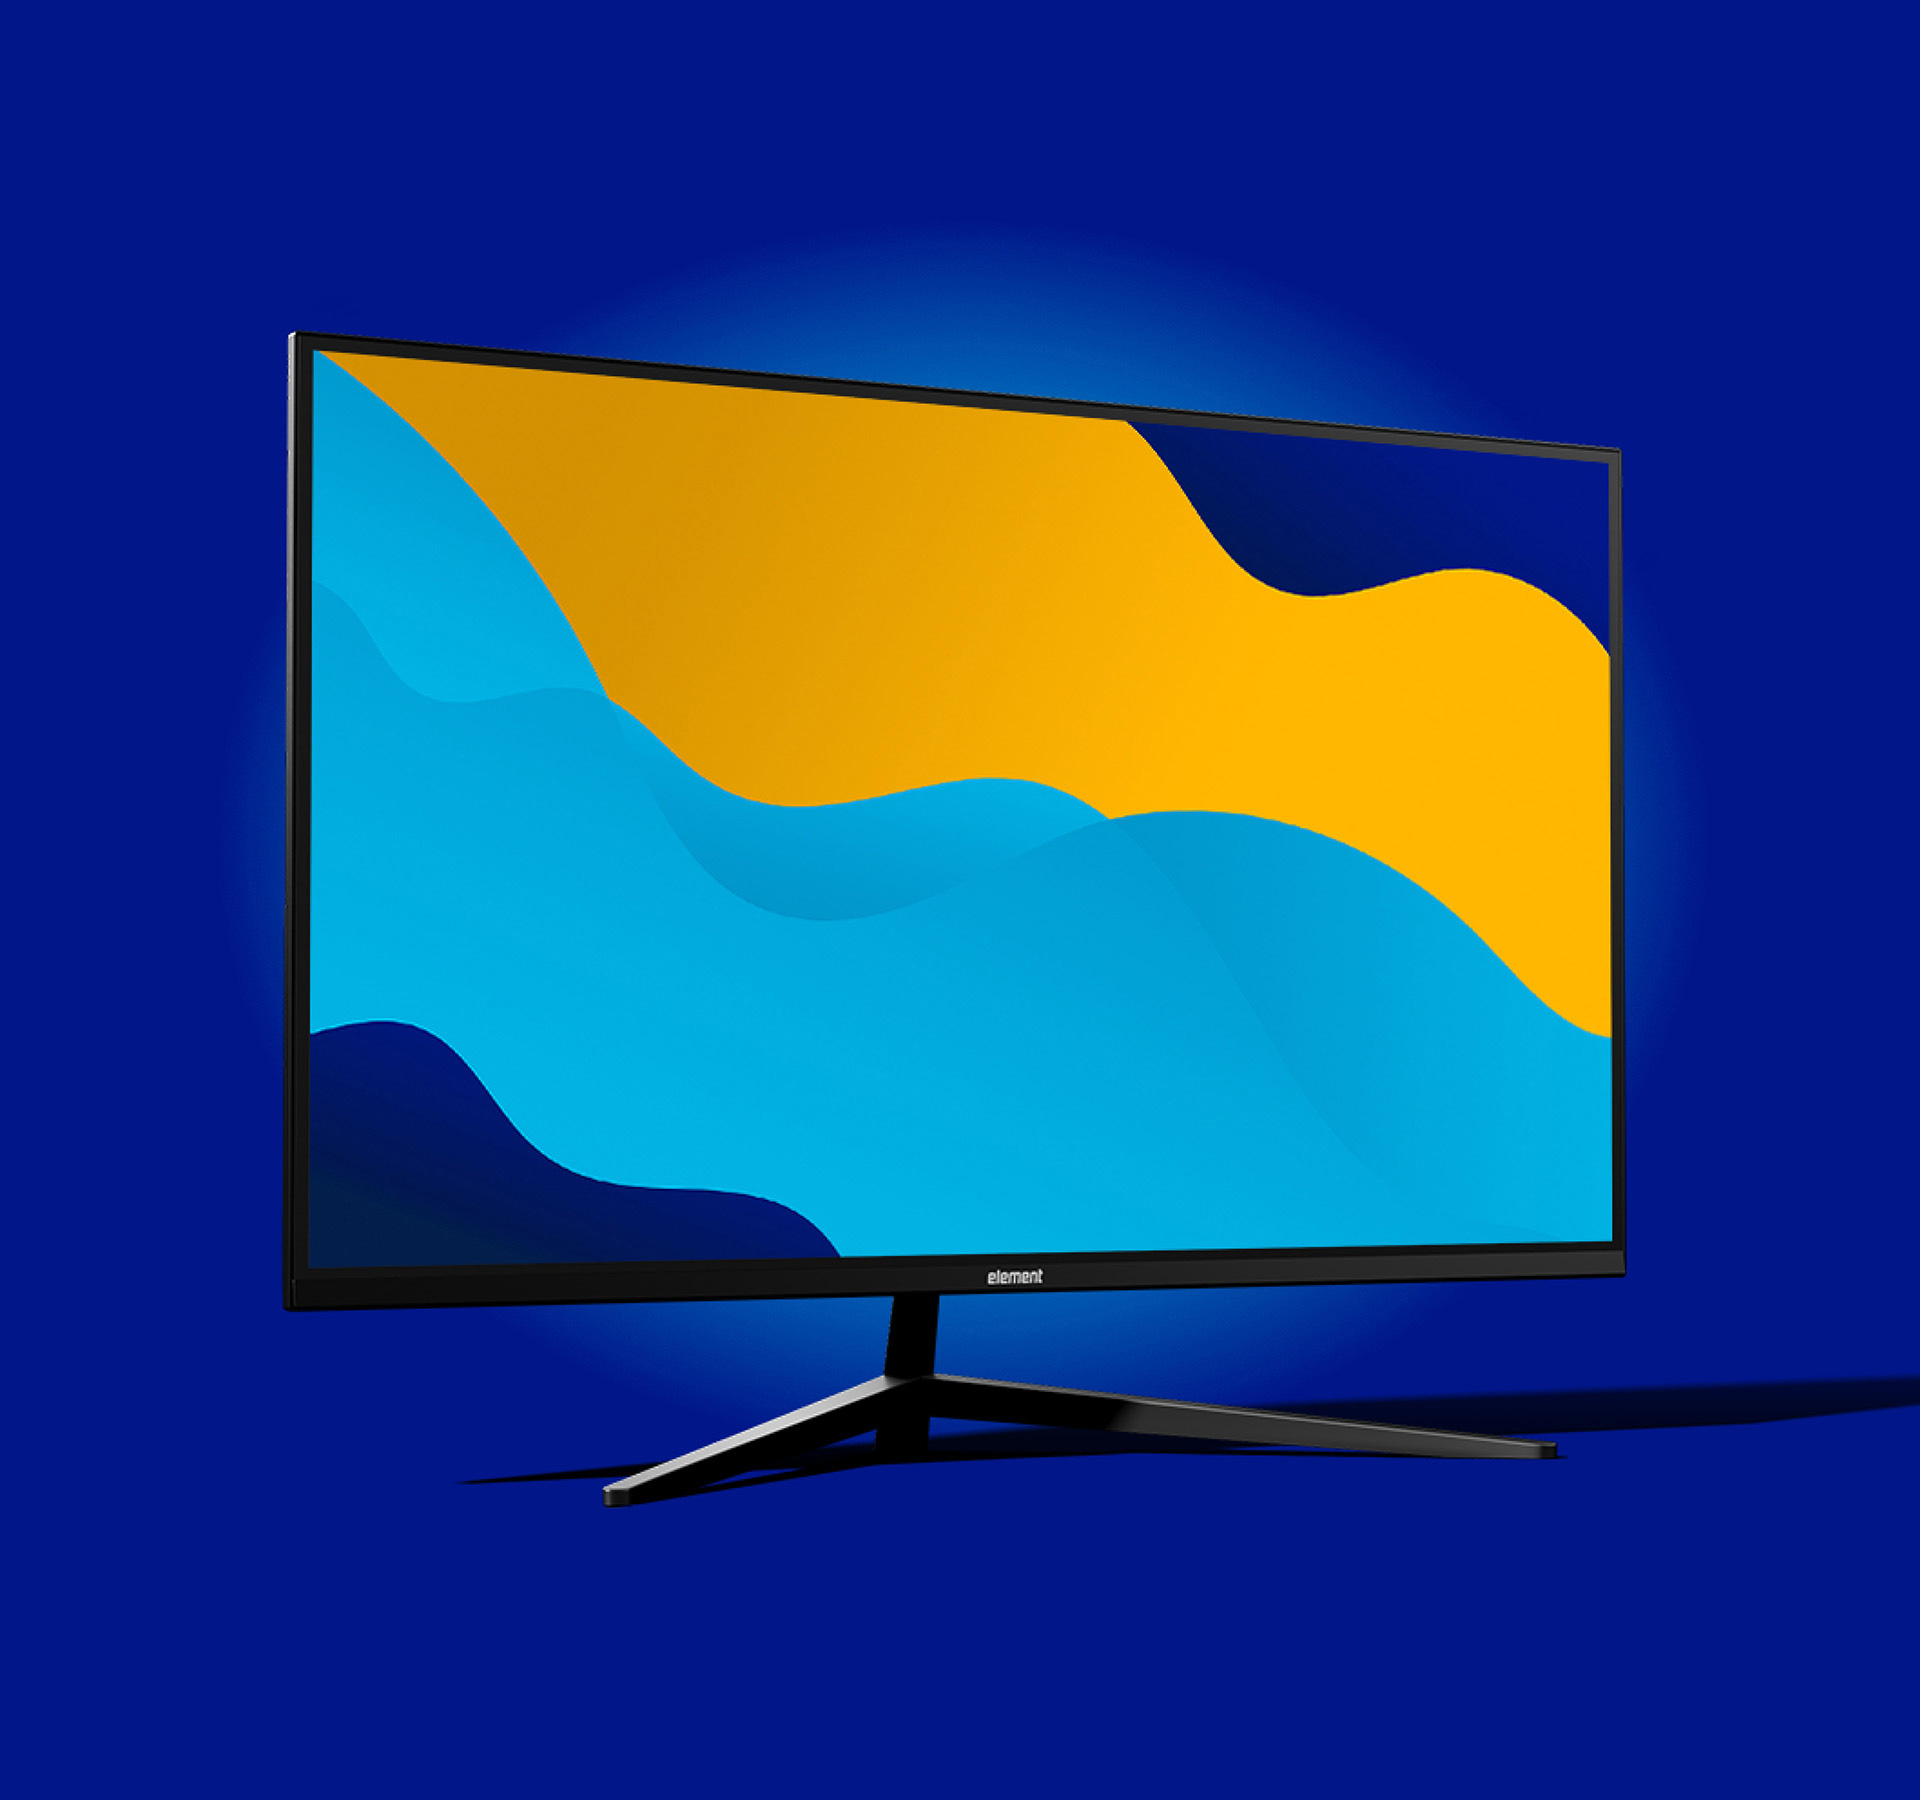 32 inch Element PC monitor on blue background